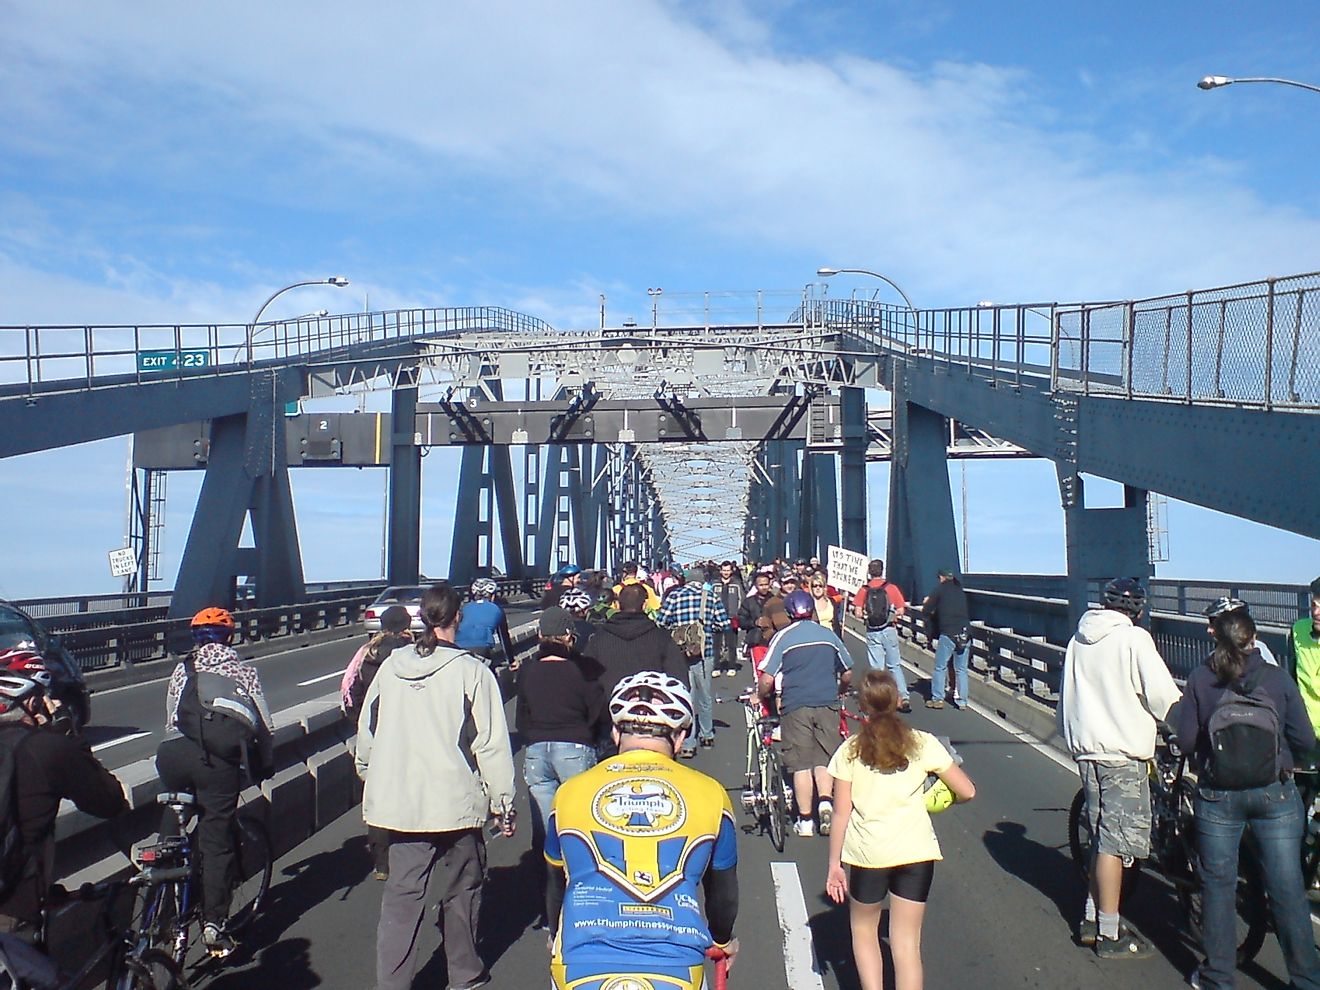 A protest event at Auckland Harbor Bridge in Auckland, New Zealand's most populated city.